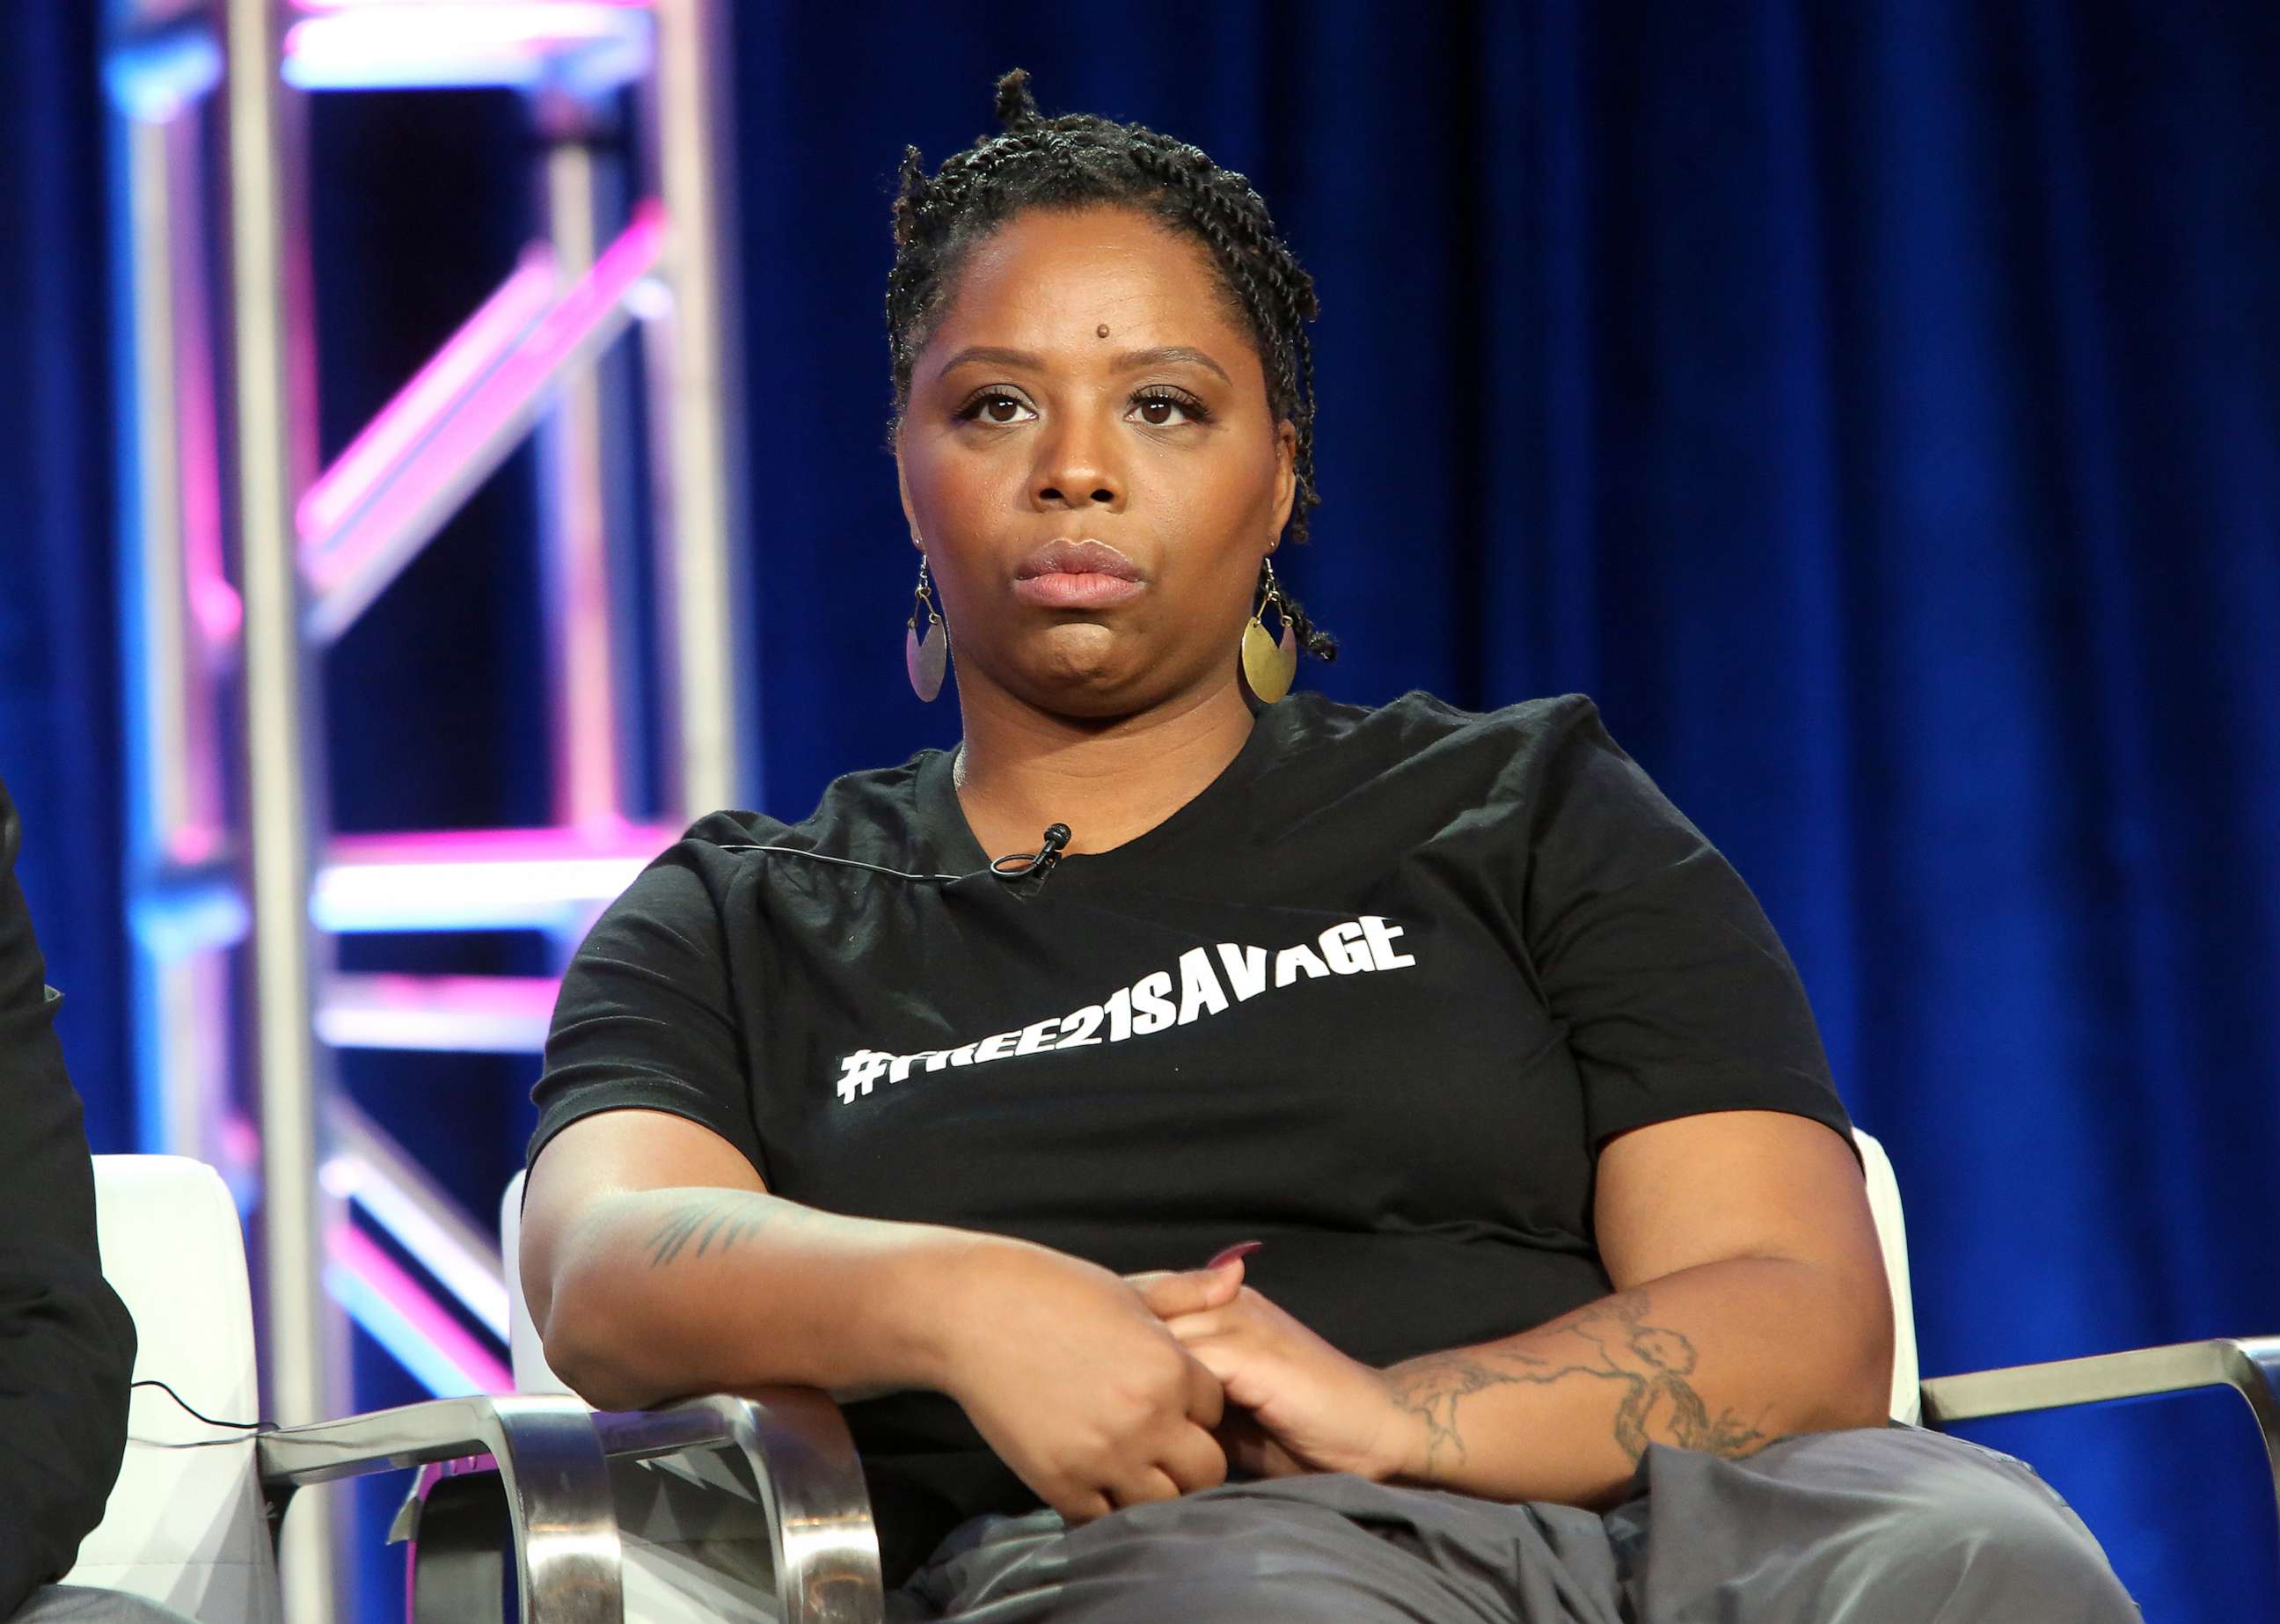 PHOTO: In this Feb. 11, 2019, file photo, producer Patrisse Cullors attends the Viacom Winter TCA 2019 panel in Pasadena, Calif.